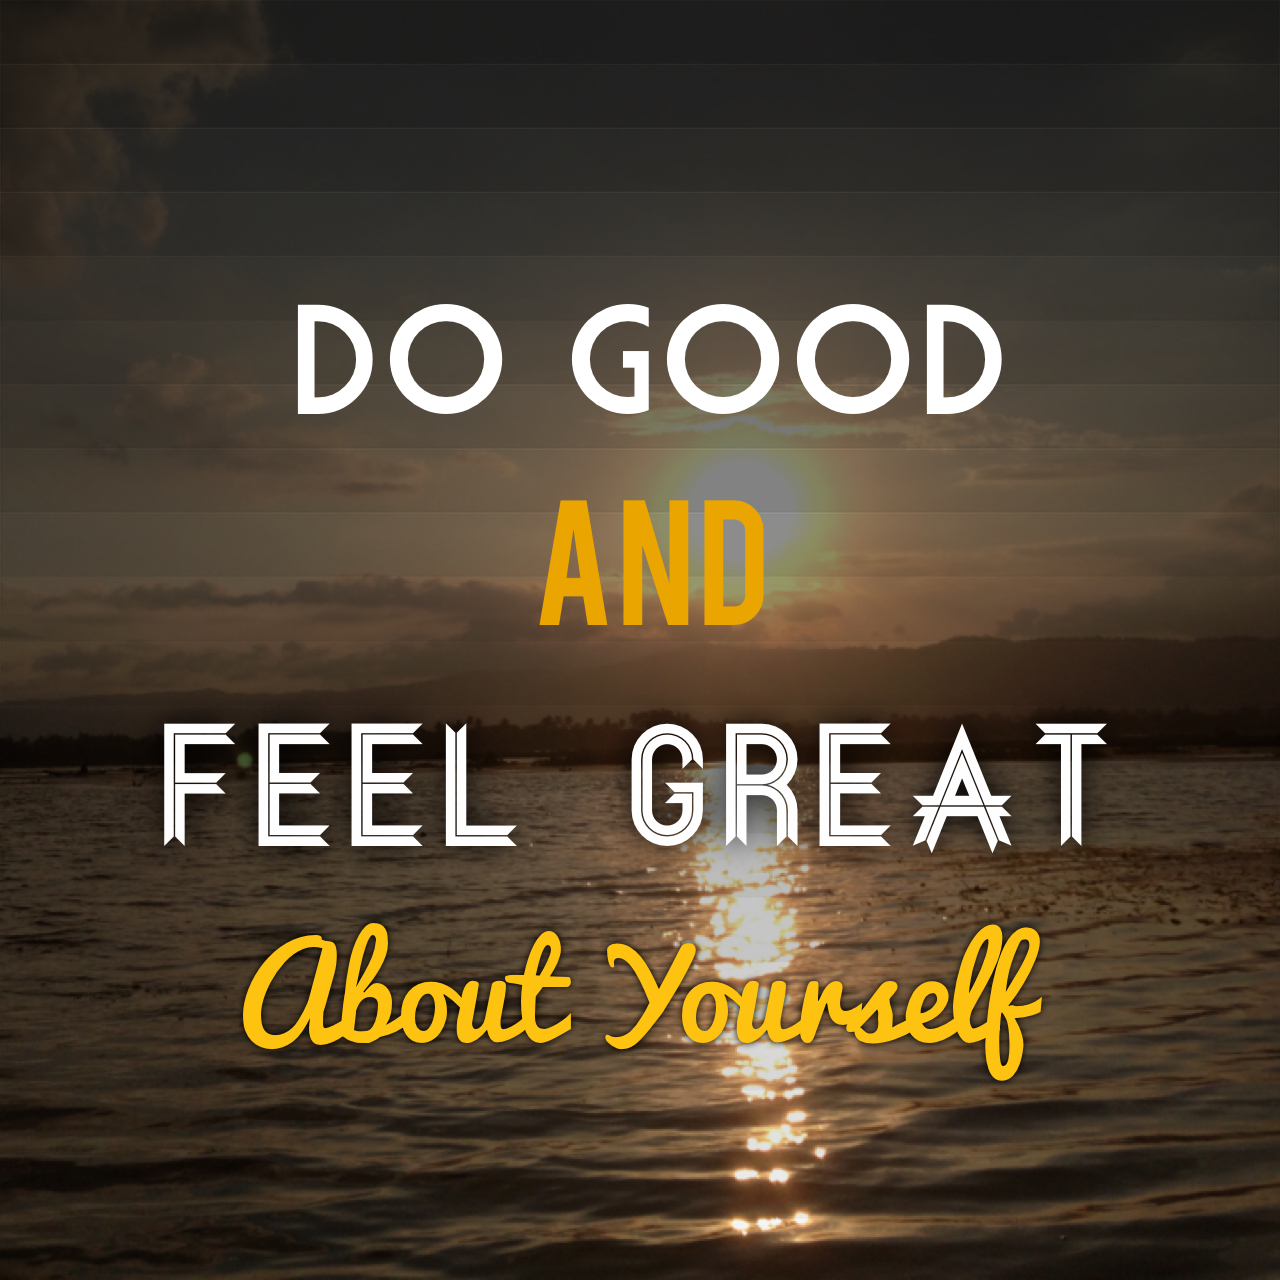 He feel good now. Feel great. Great quotes. Be good do good feel good. Feeling good никто.